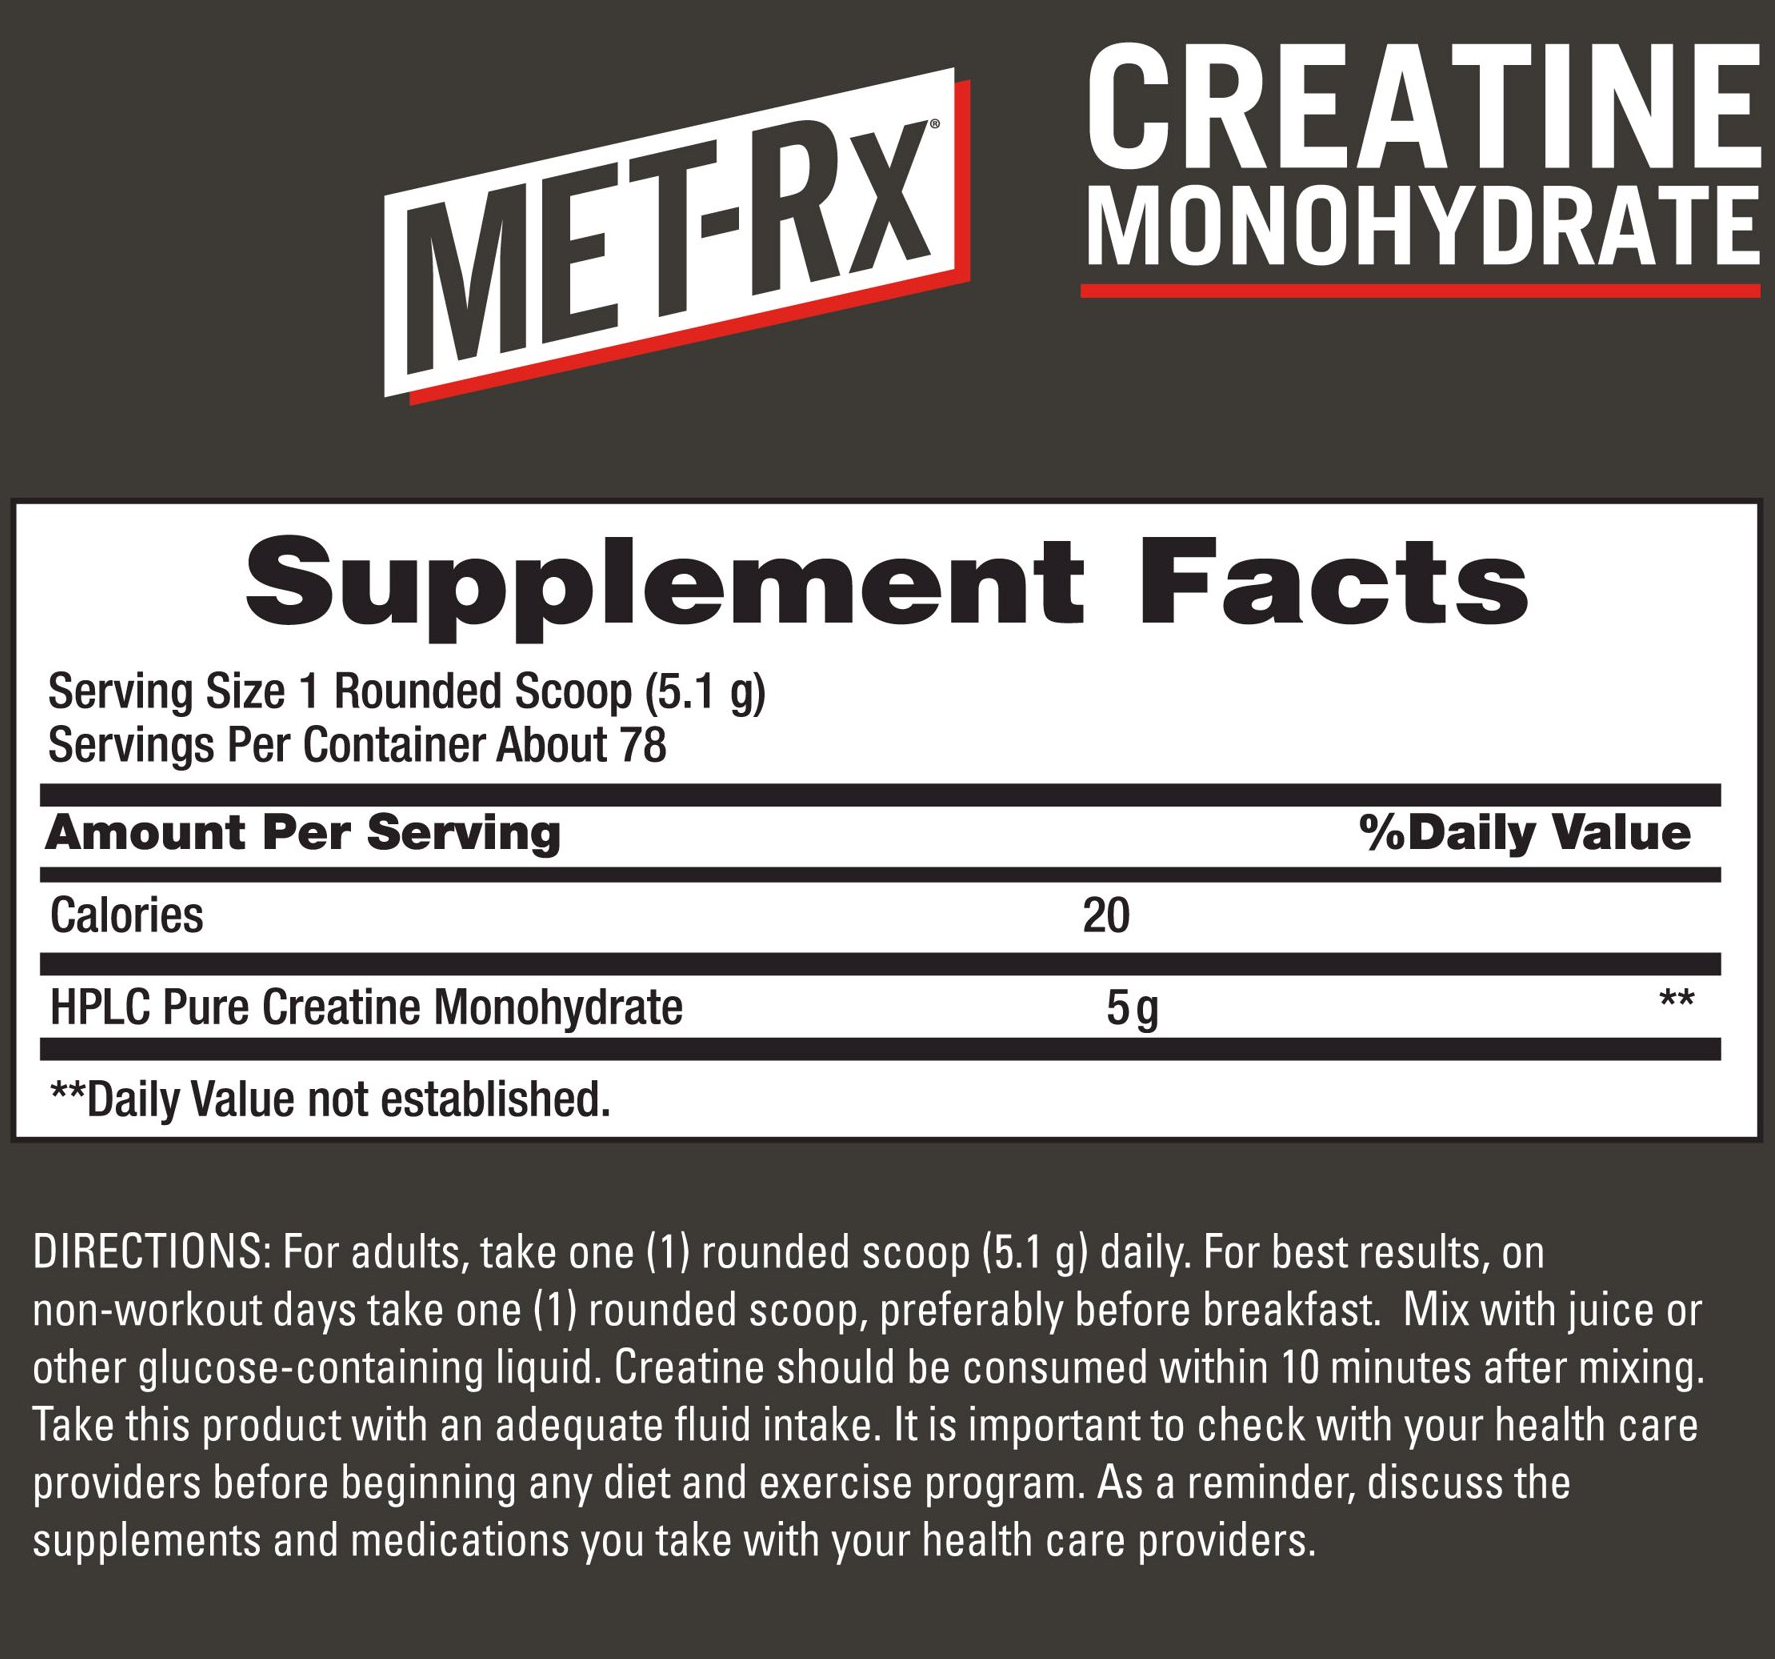 Met-Rx Creatine Monohydrate supplement facts and instructions for use, detailing serving size, ingredients, and consumption timing.